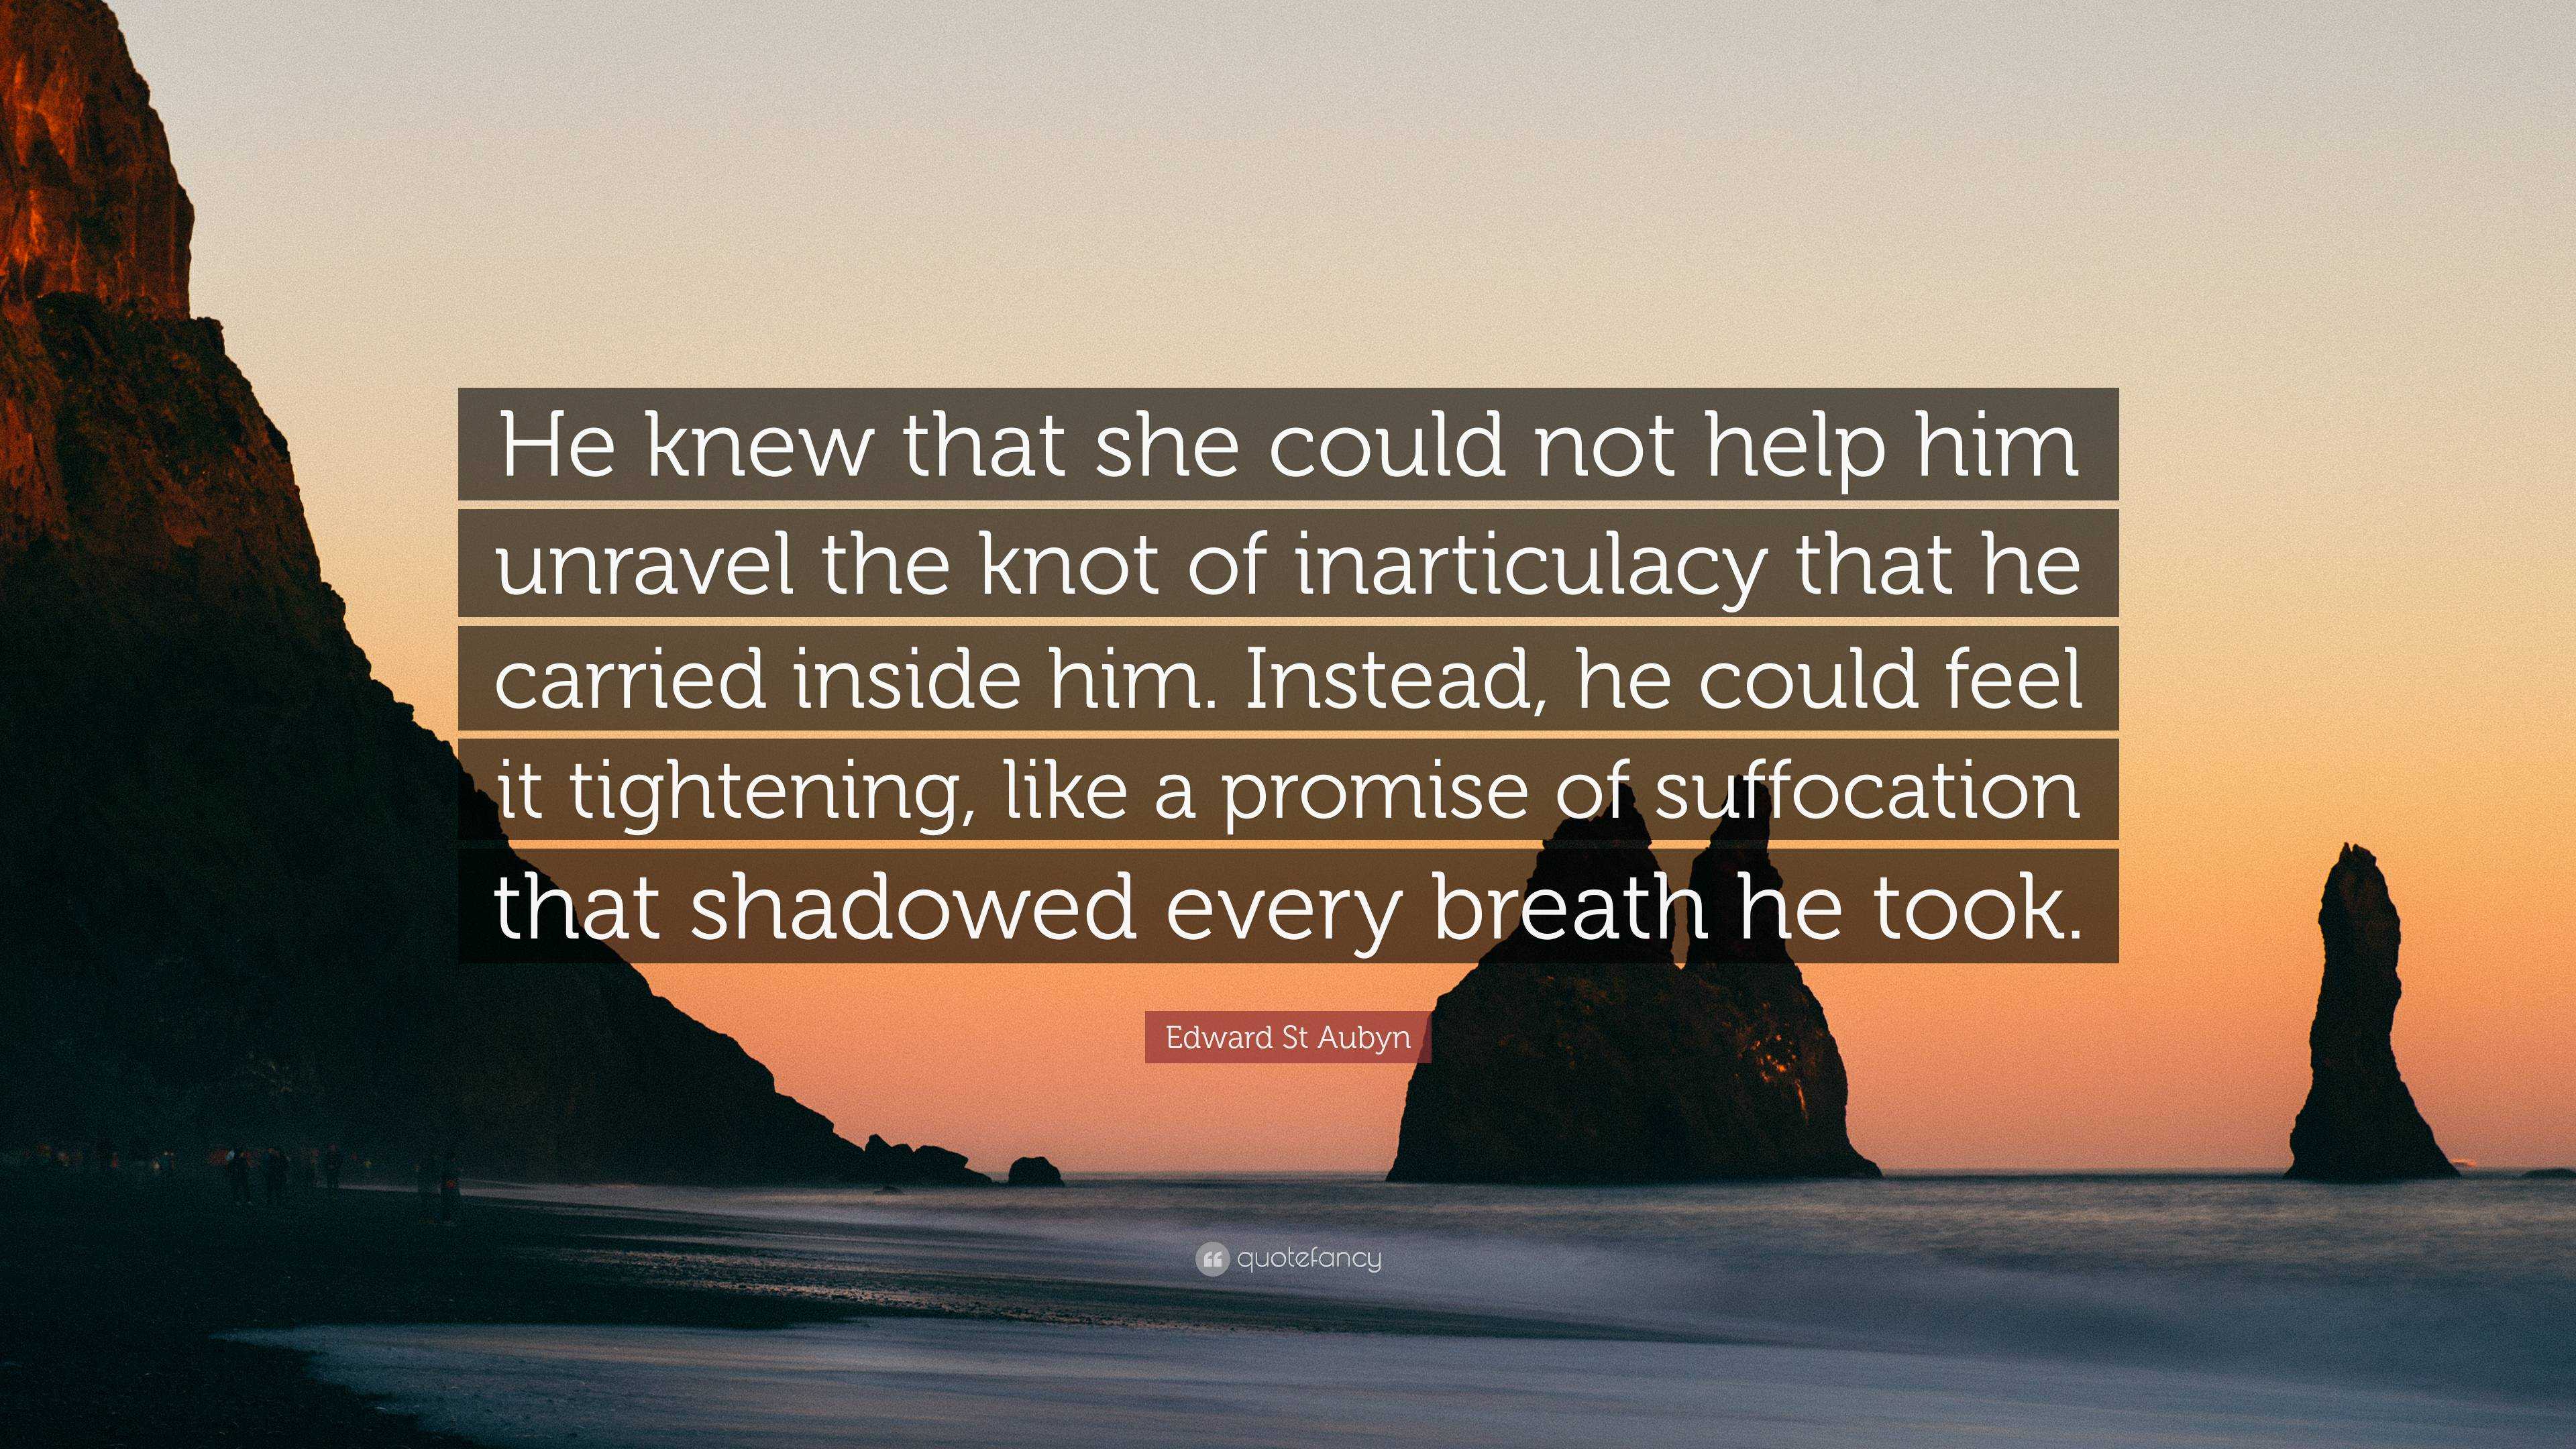 Edward St Aubyn Quote: “He knew that she could not help him unravel the ...